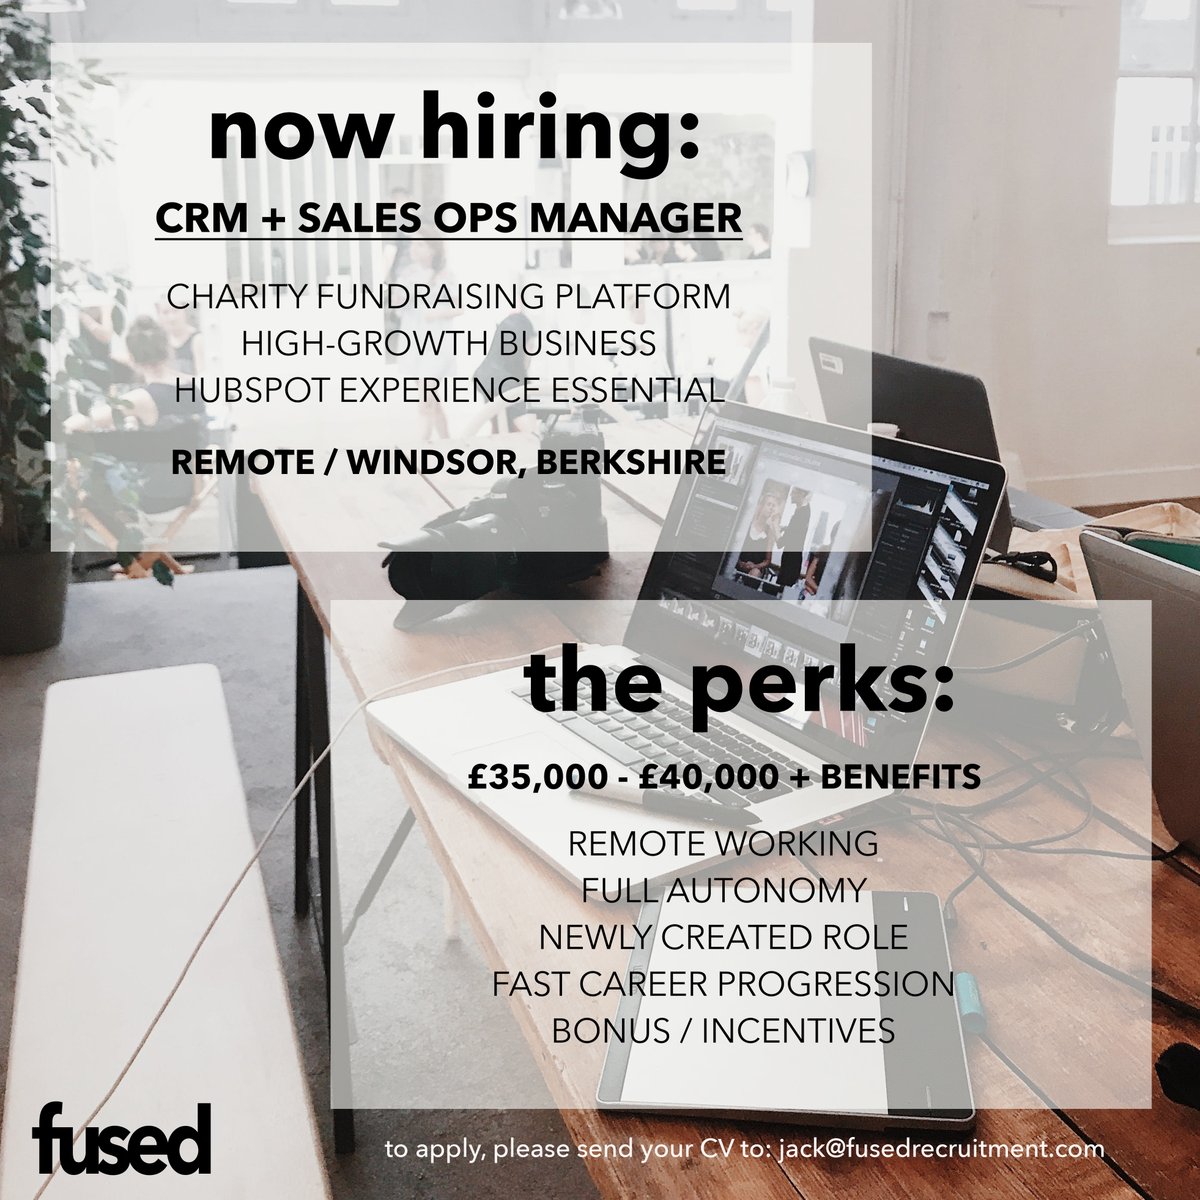 Looking for your next CRM Manager role with a fully remote working setup? Our client - a leading Charity could be the next place for you! #hiring #hubspot #crmjobs #salesopsjobs #recruitment #hubspotjobs